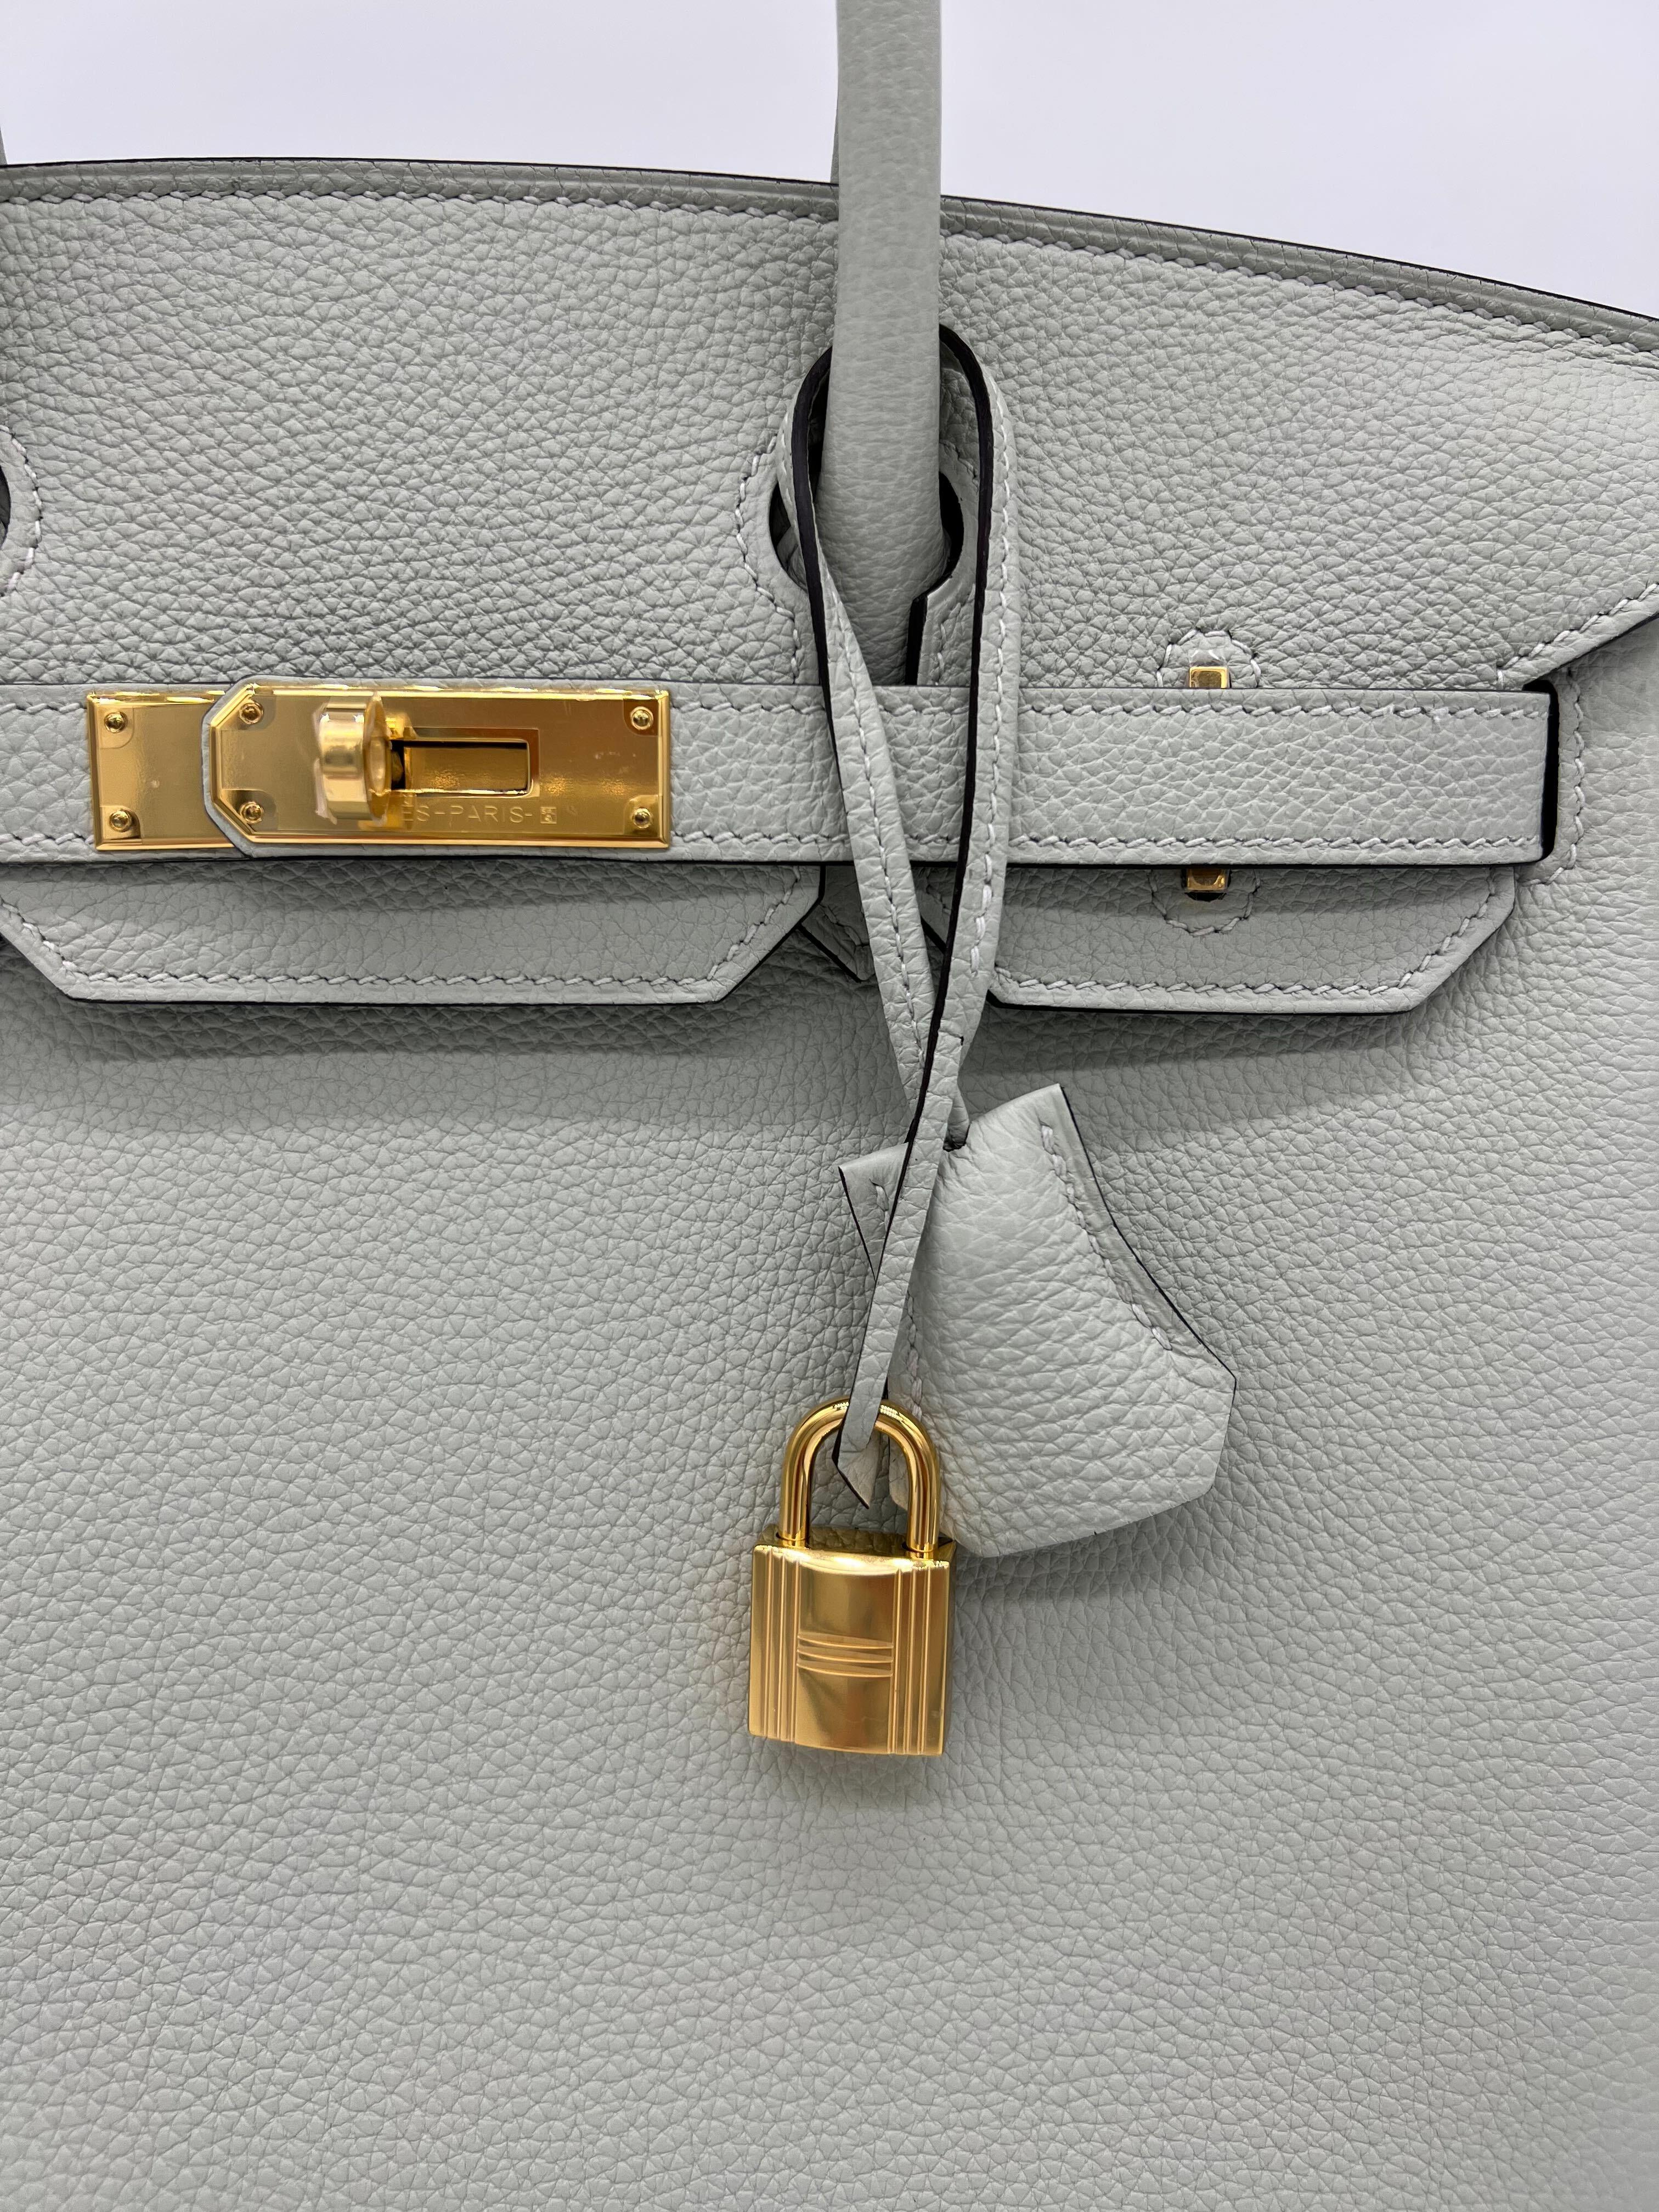 Hermes Birkin 30 Veau Togo Gris Neve Gold Hardware In New Condition For Sale In New York, NY